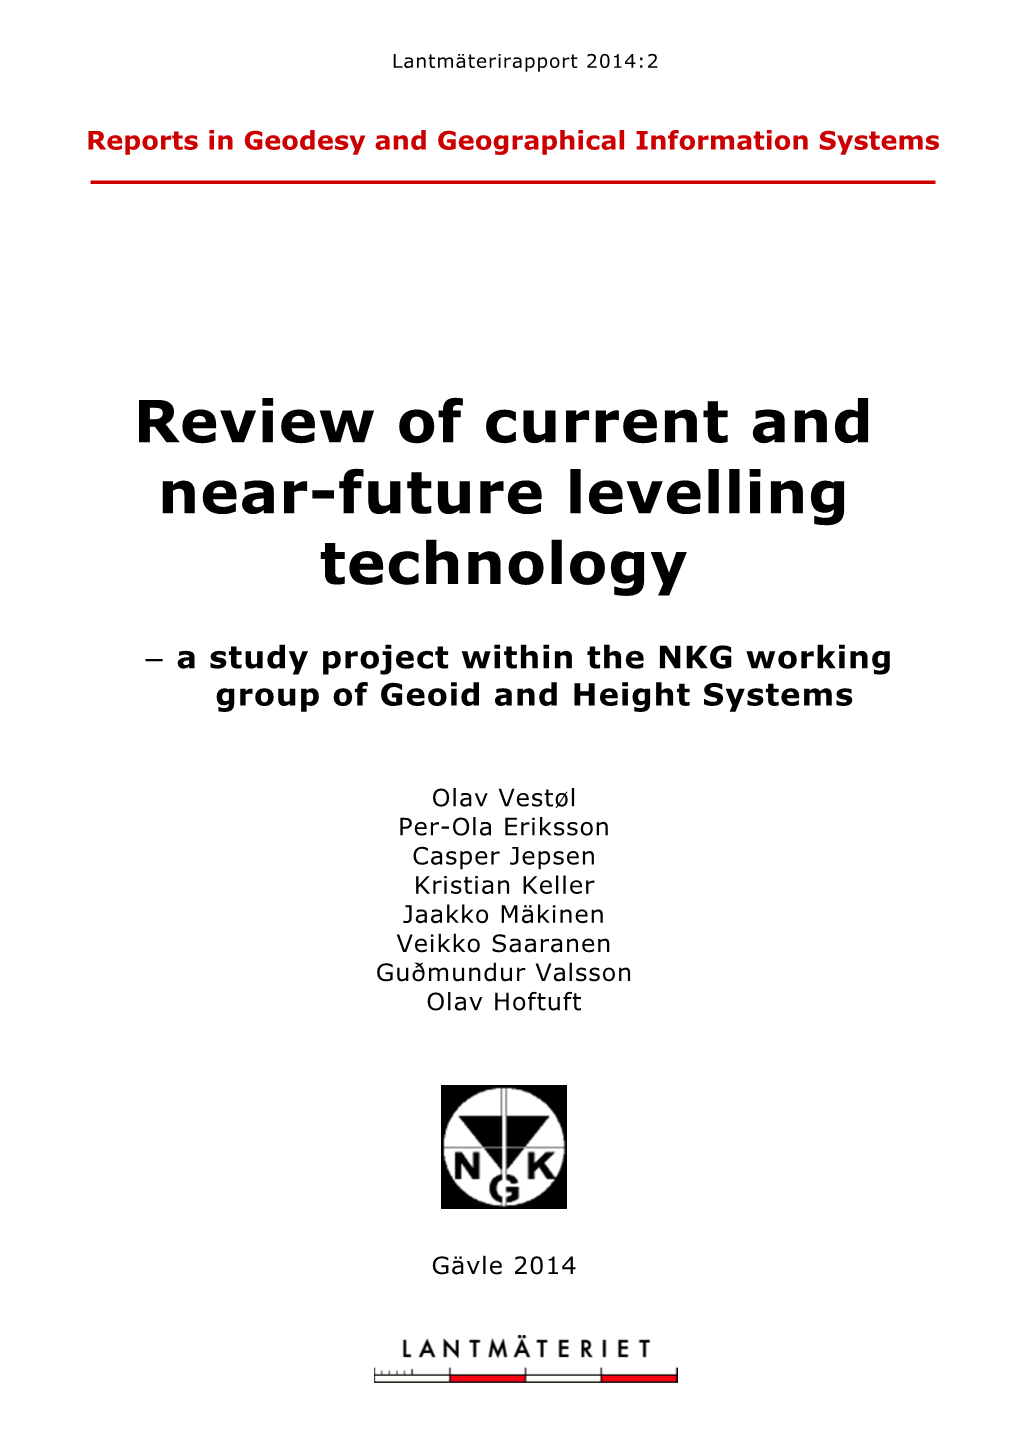 Review of Current and Near-Future Levelling Technology